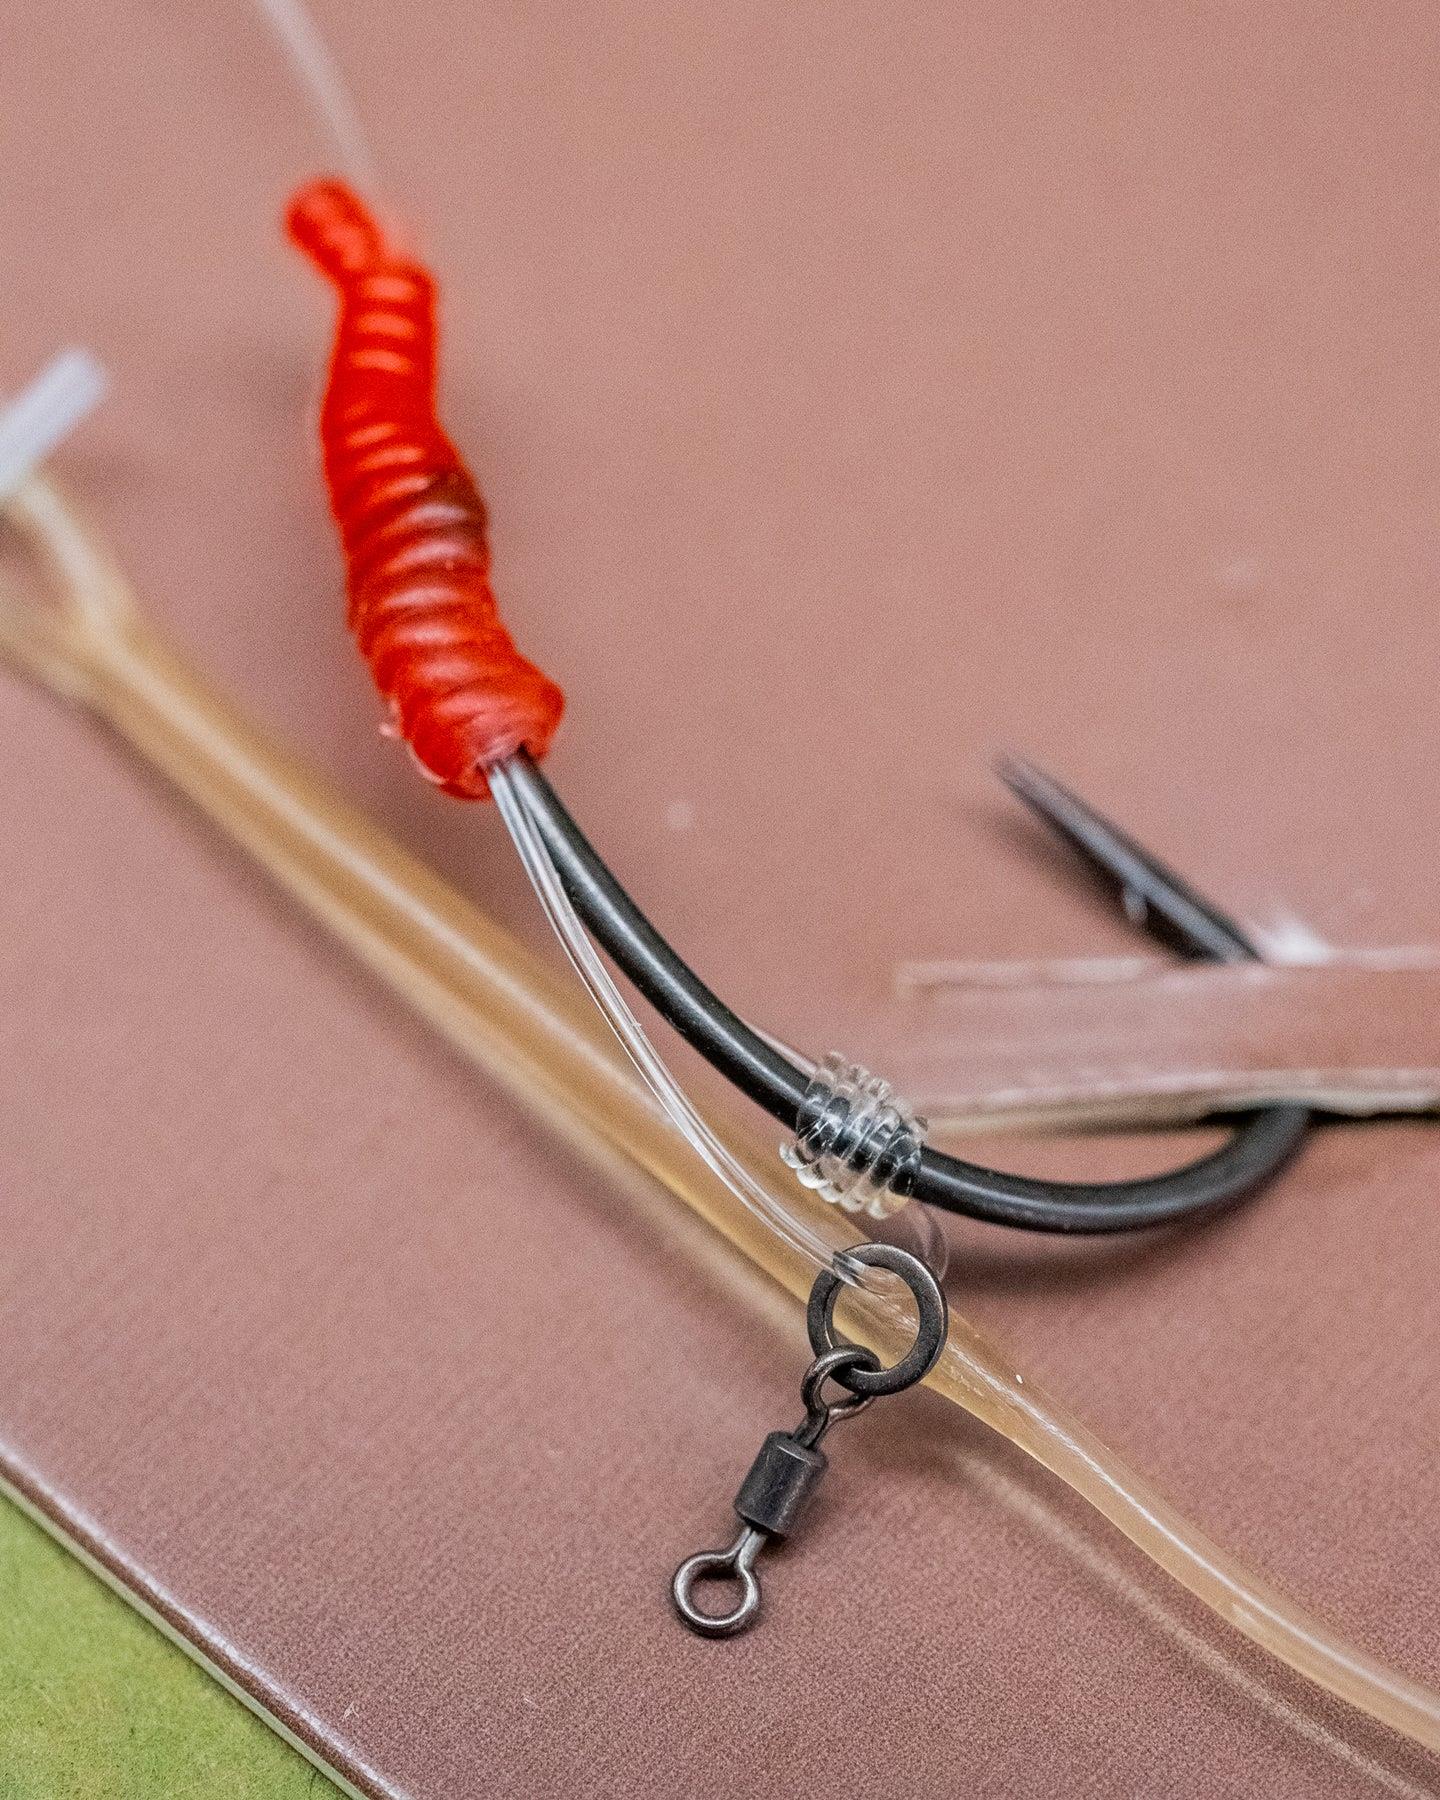 One More Cast All-In-1 Rig Fuzed Leader Leadclip D-Rig Micro Barbed